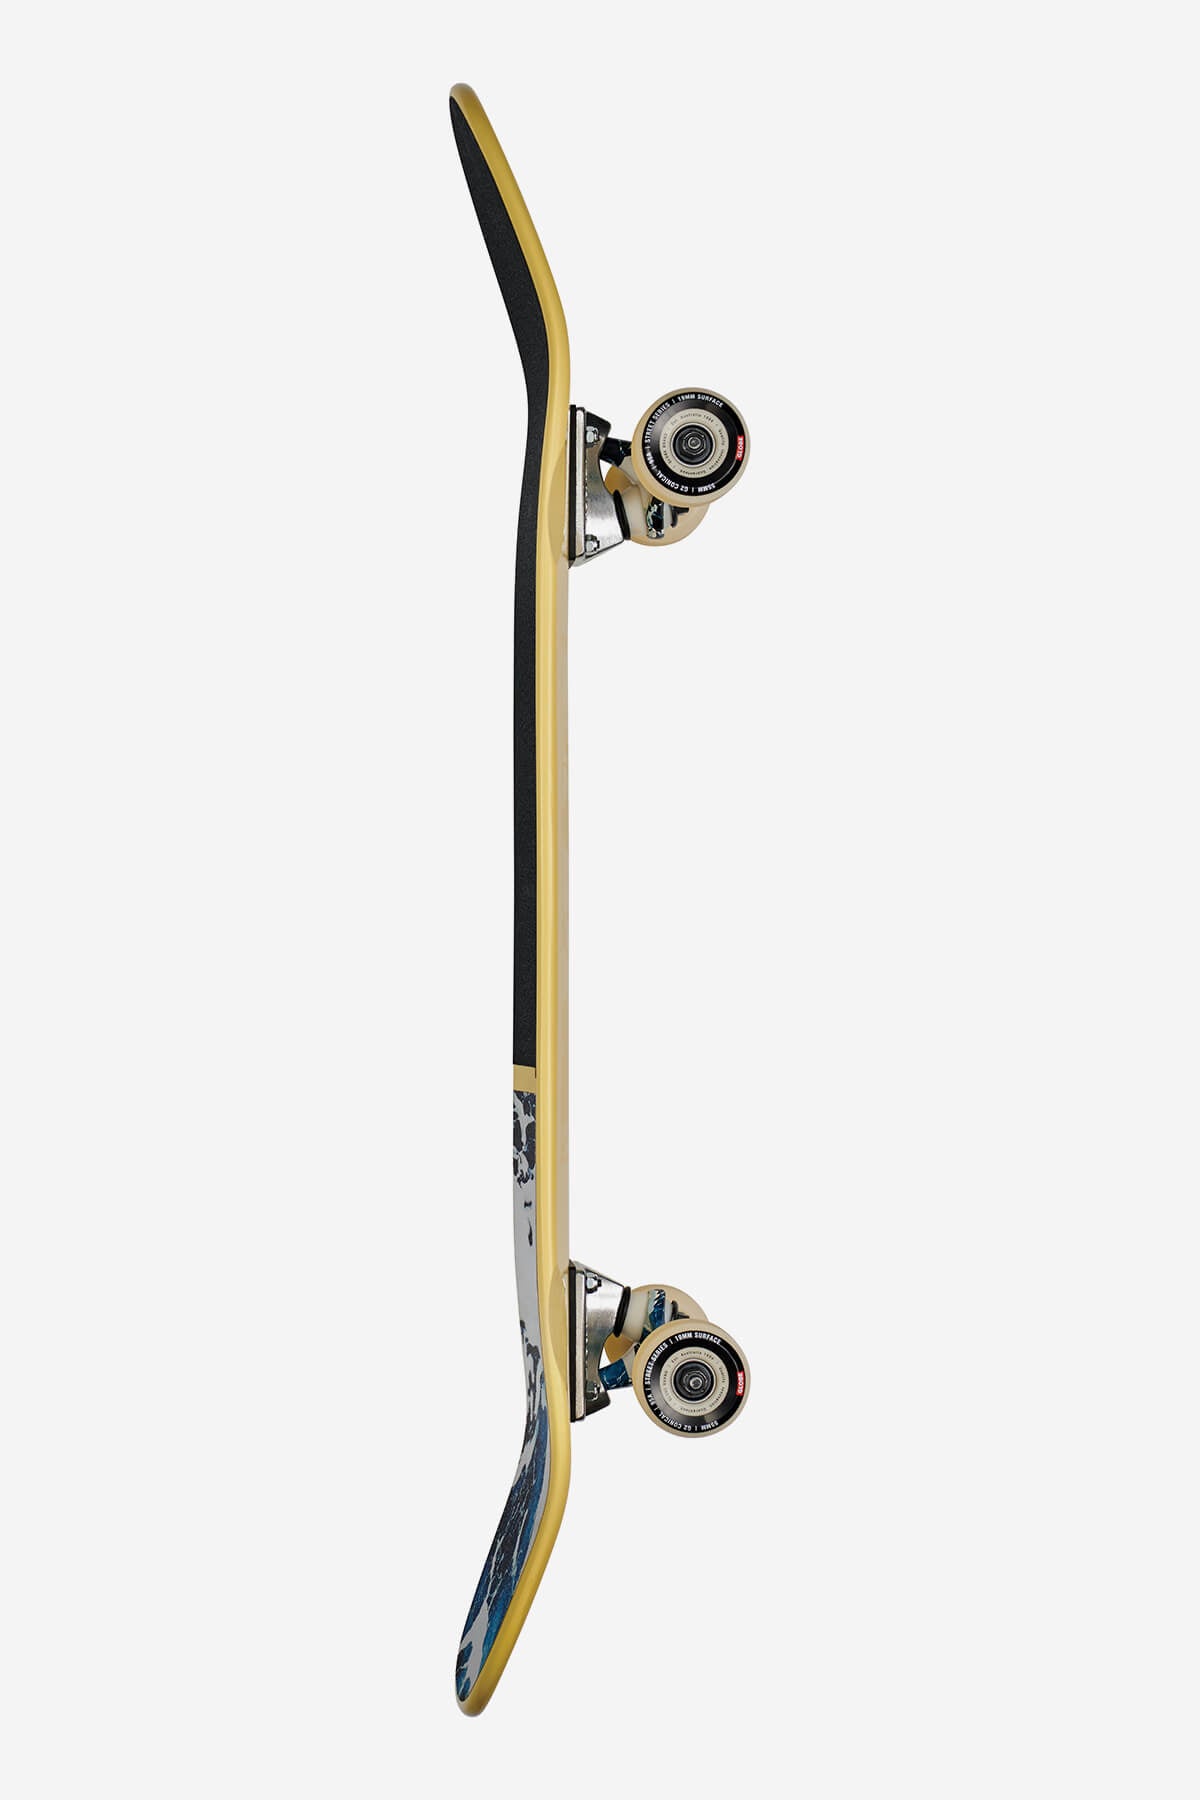 Globe - Shooter - Yellow/Comehell - 8.625" Skate completo